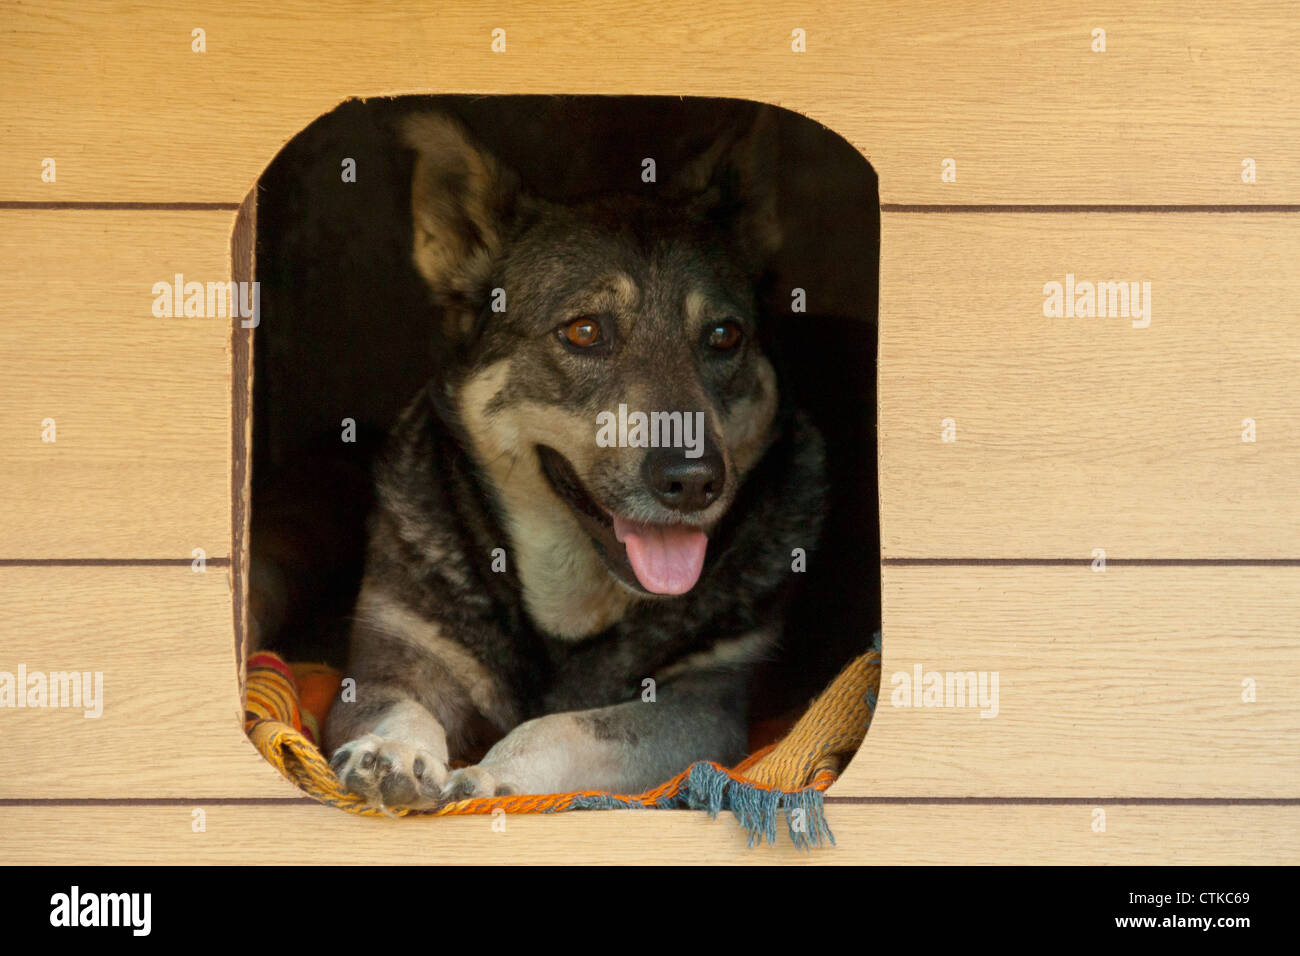 Dog in a kennel Stock Photo